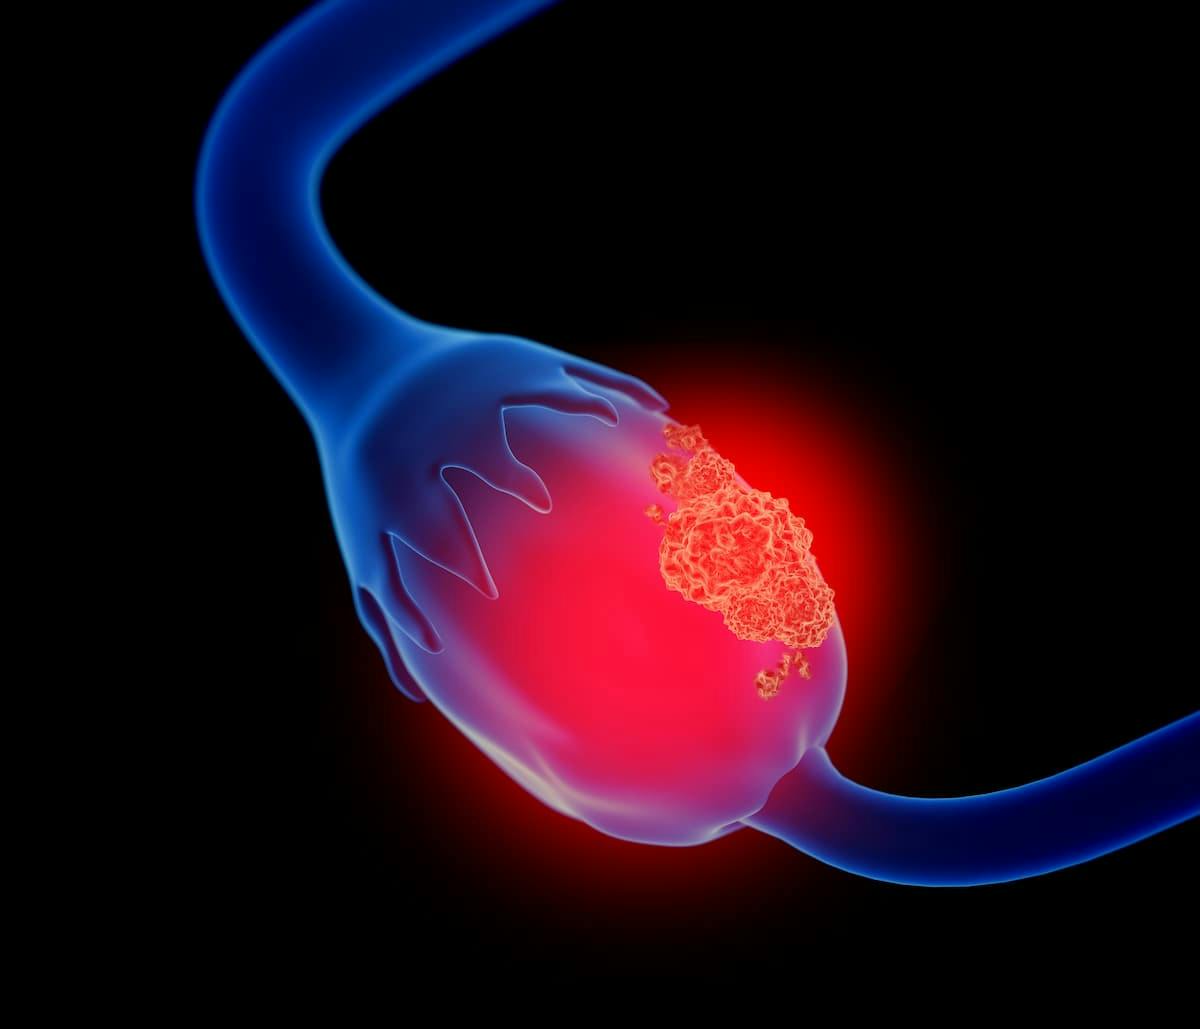 Vistusertib/Paclitaxel Appears Safe With No OS Benefit in Ovarian Cancer | Image Credit: © Lars Neumann - stock.adobe.com.